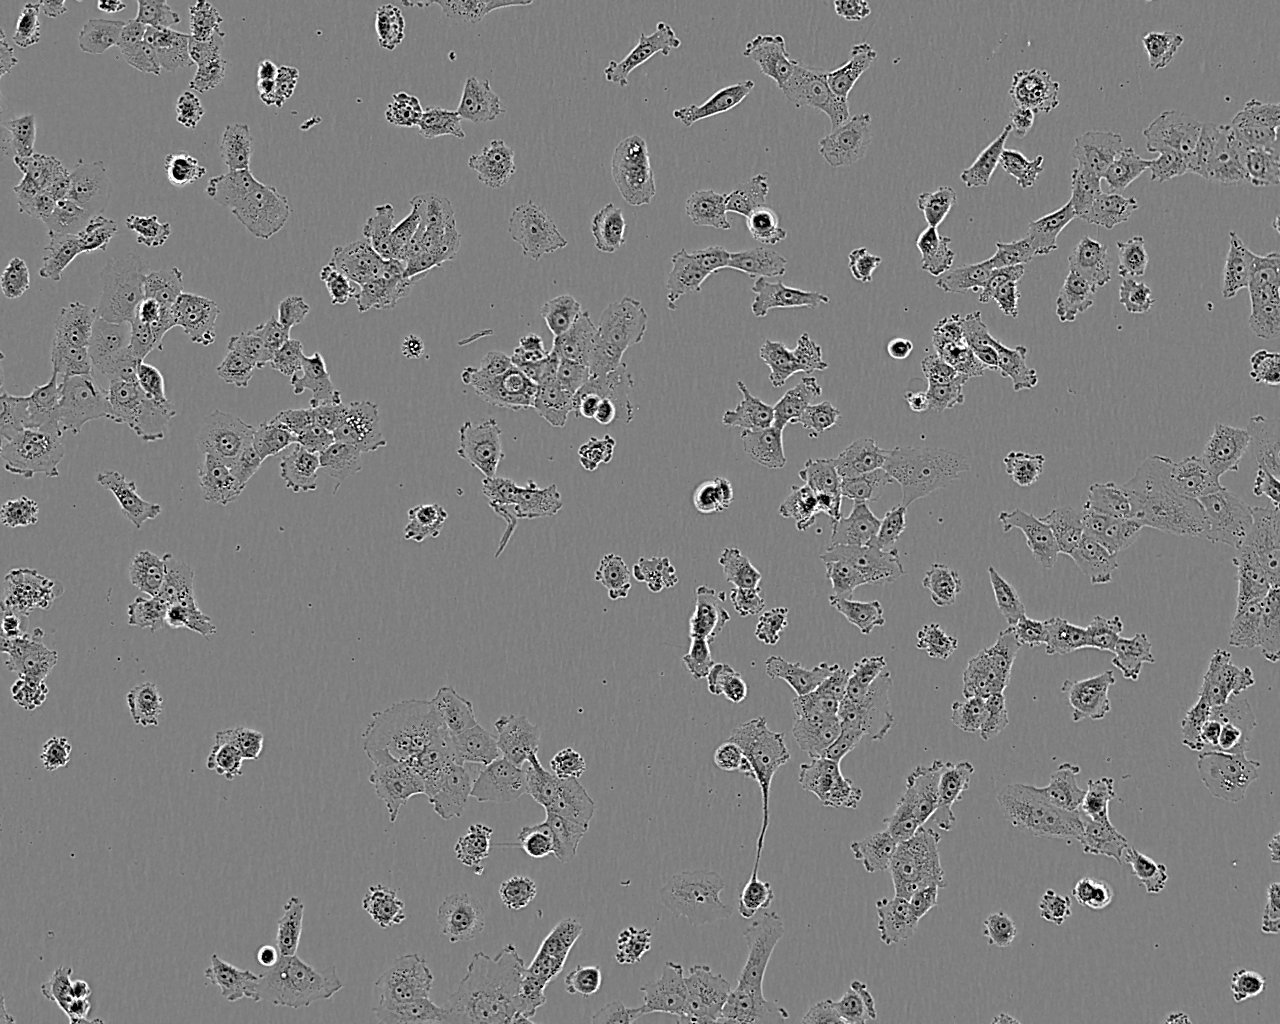 RERF-LC-MS Cell:人肺癌腺癌细胞系,RERF-LC-MS Cell